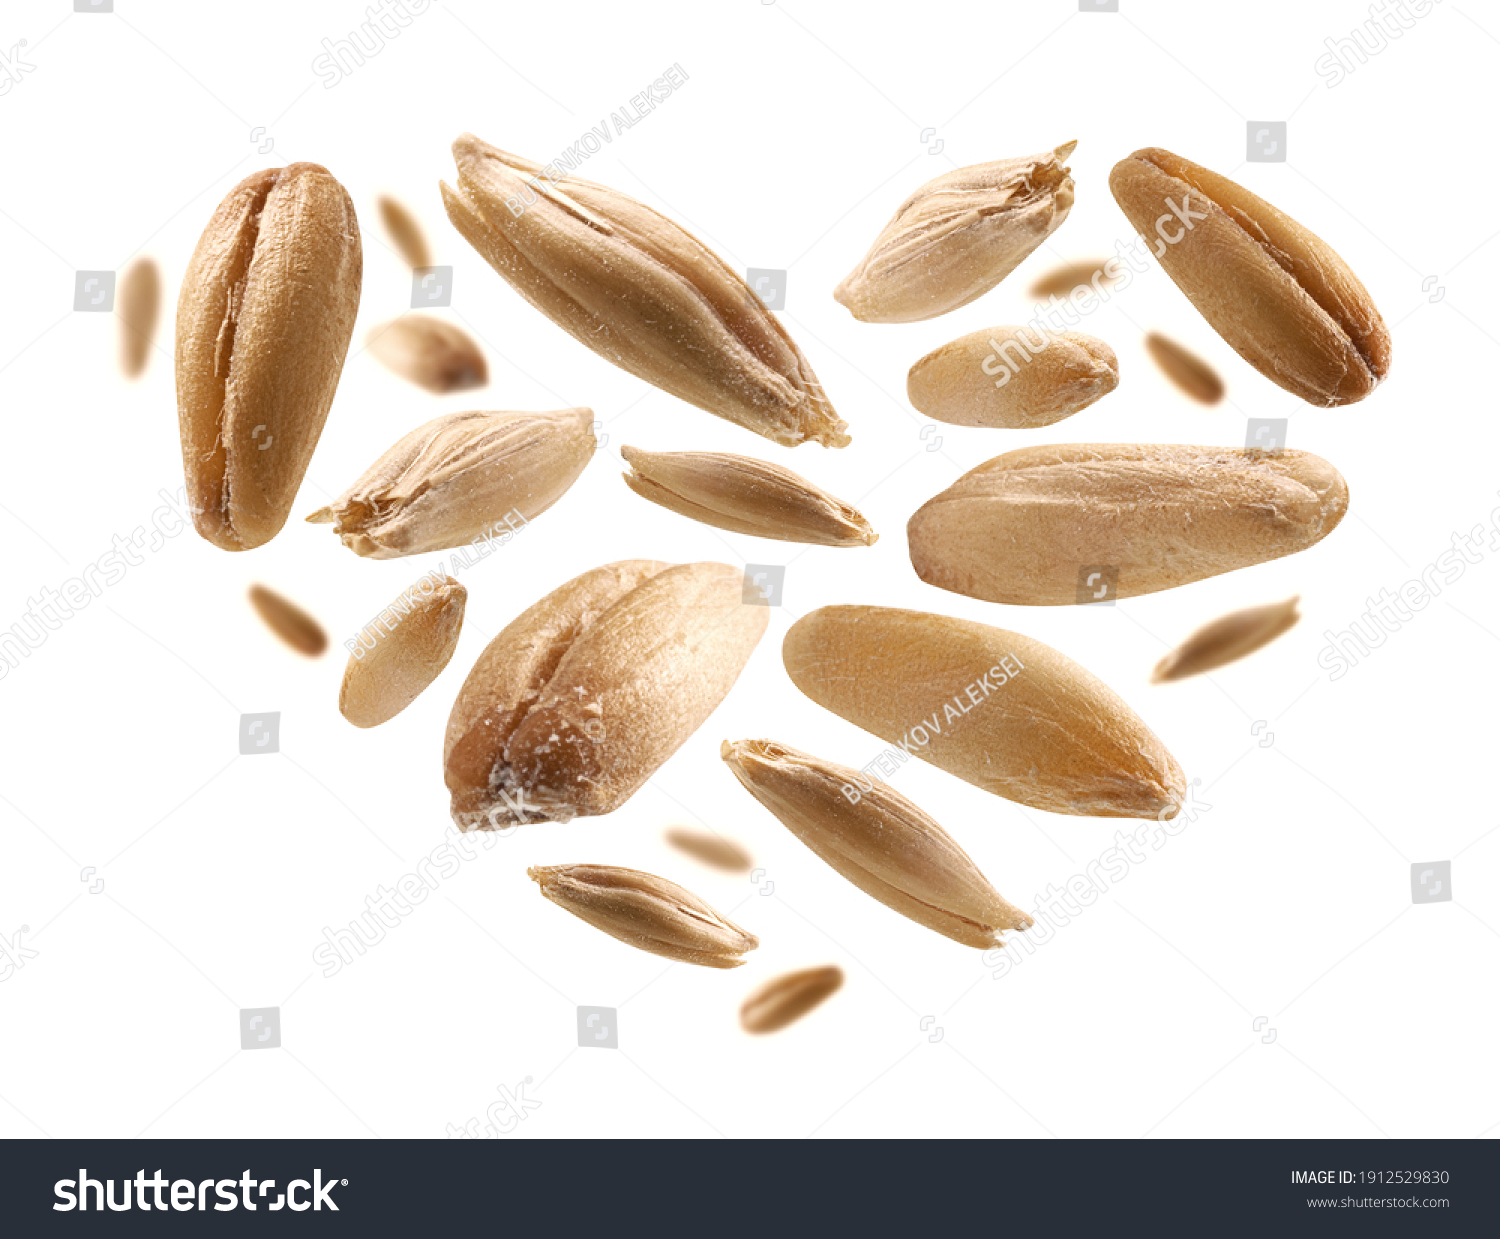 Oat grains in the shape of a heart on a white background #1912529830